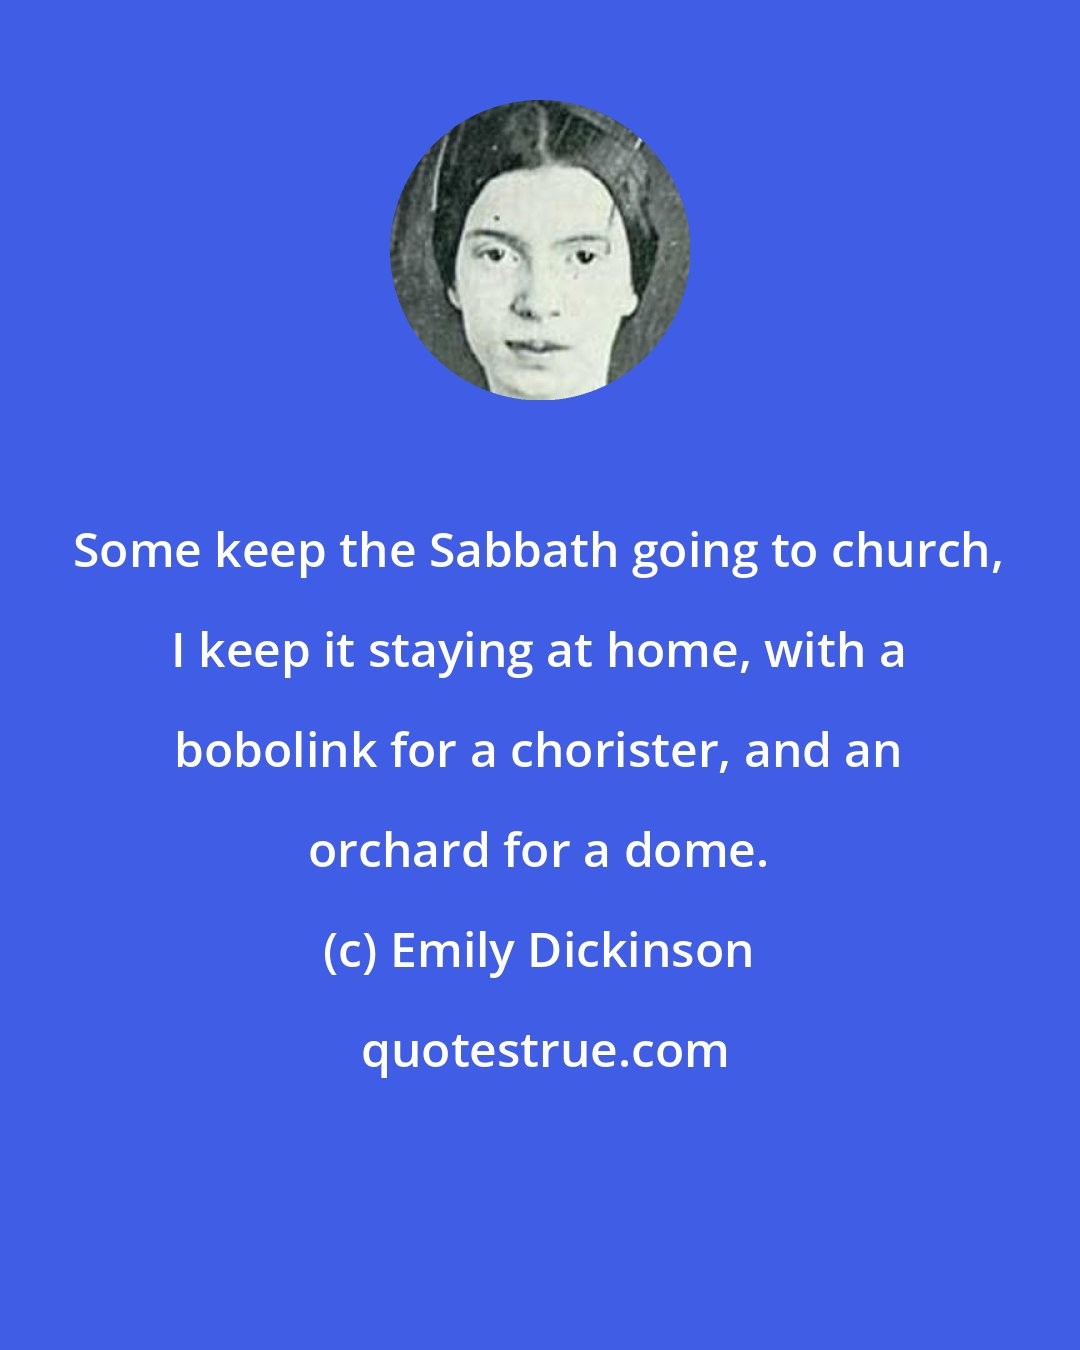 Emily Dickinson: Some keep the Sabbath going to church, I keep it staying at home, with a bobolink for a chorister, and an orchard for a dome.